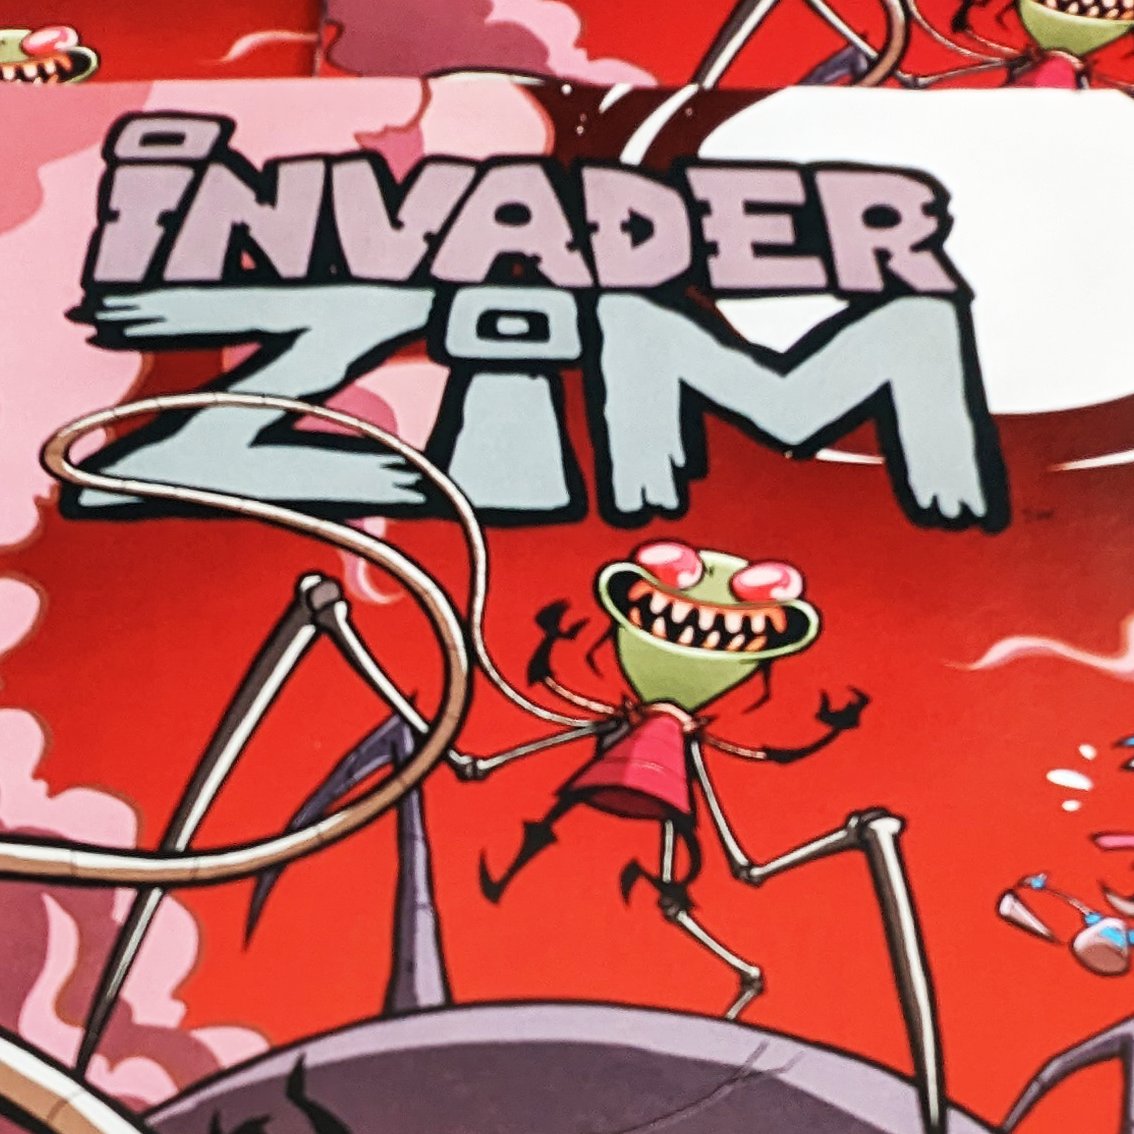 Image of INVADER ZIM #12 retail cover (signed)